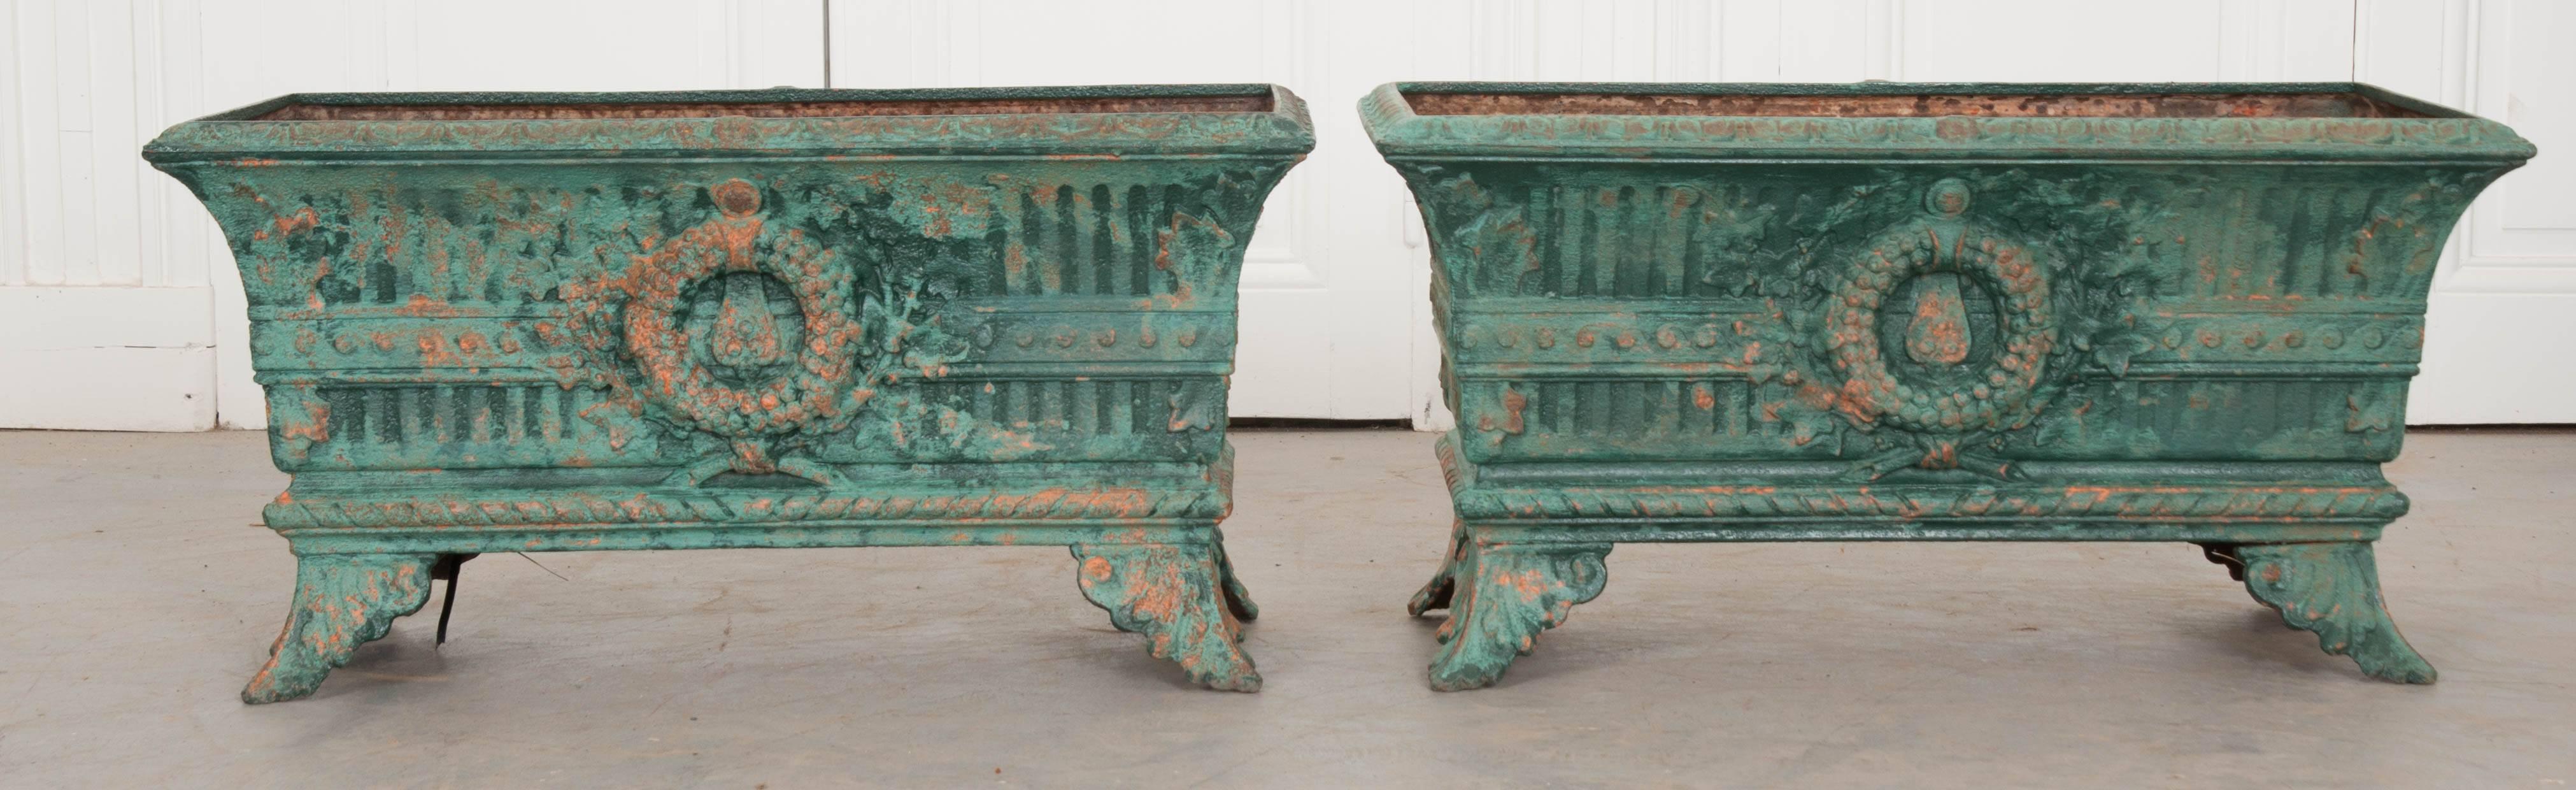 Two incredible French cast iron planters that have been painted, circa 1870. The rectilinear planters are perched atop decorative bracket feet, don in an acanthus leaf motif. Front and center lie circular wreaths that lie on top of a belt encircling